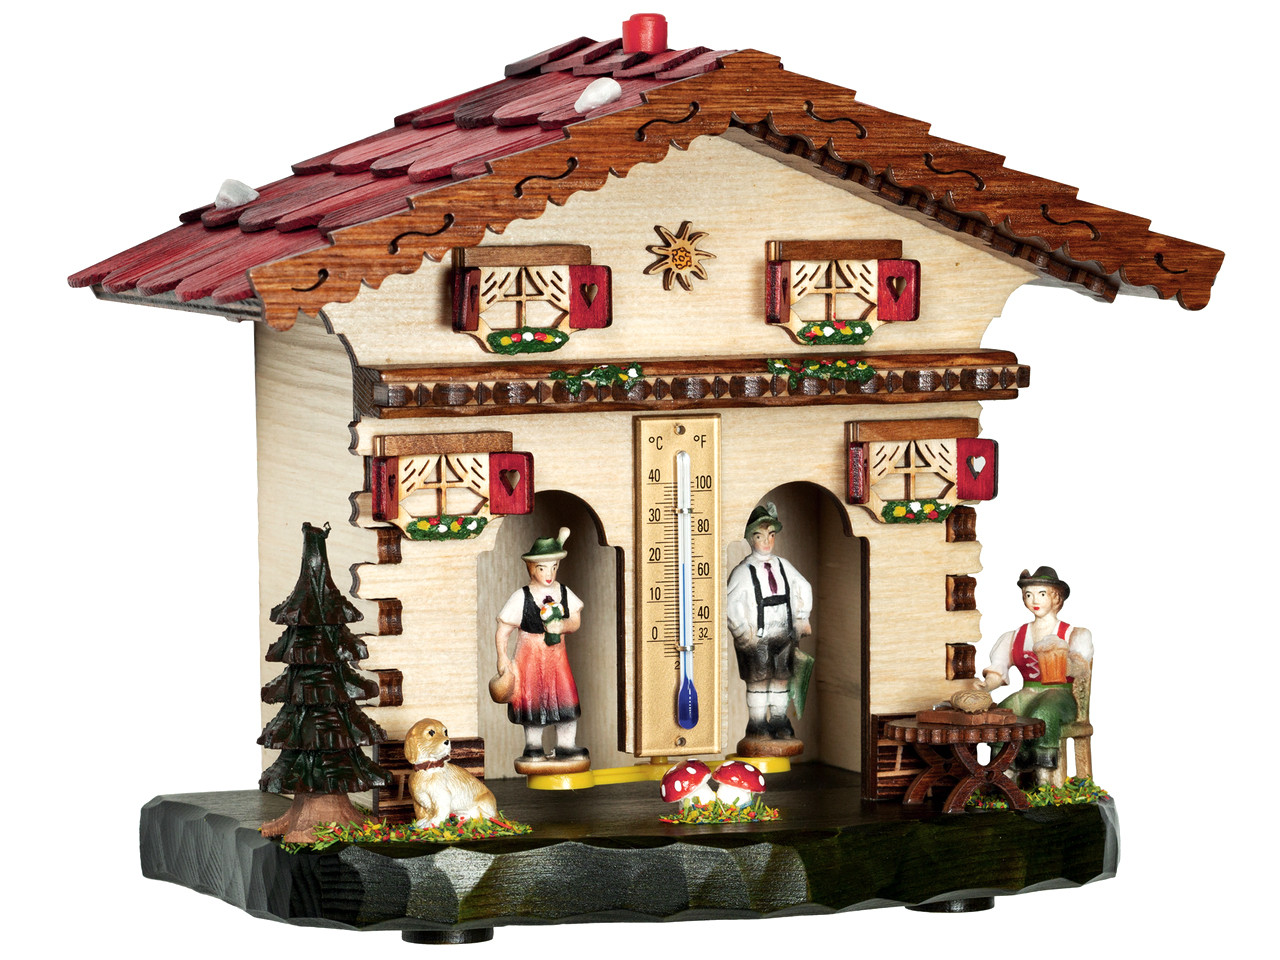 https://cdn11.bigcommerce.com/s-zamzb/images/stencil/1280x1280/products/5138/12784/861-Wooden-Bavarian-German-Weather-House-with-Thermometer__37304.1646153100.jpg?c=2